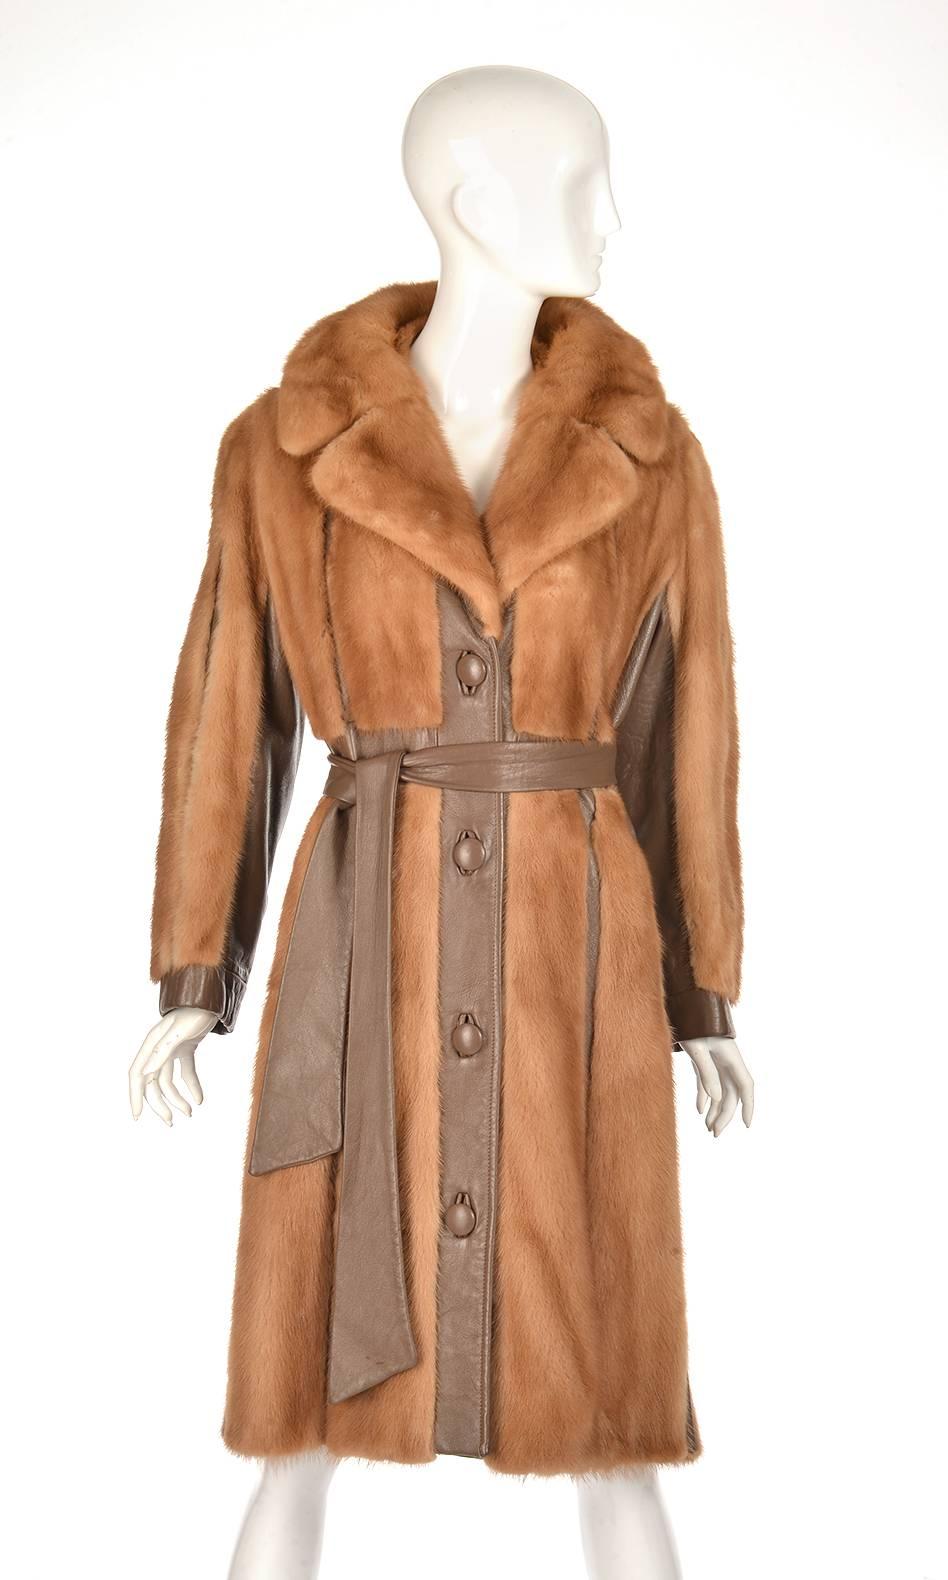 
This Aladino Stefani Originals coat is as edgy as it is polished. The coat is composed of caramel mink panels interposed with chocolate brown leather, a mink collar, and a leather belt. The coat features four large leather buttons, and is lined.